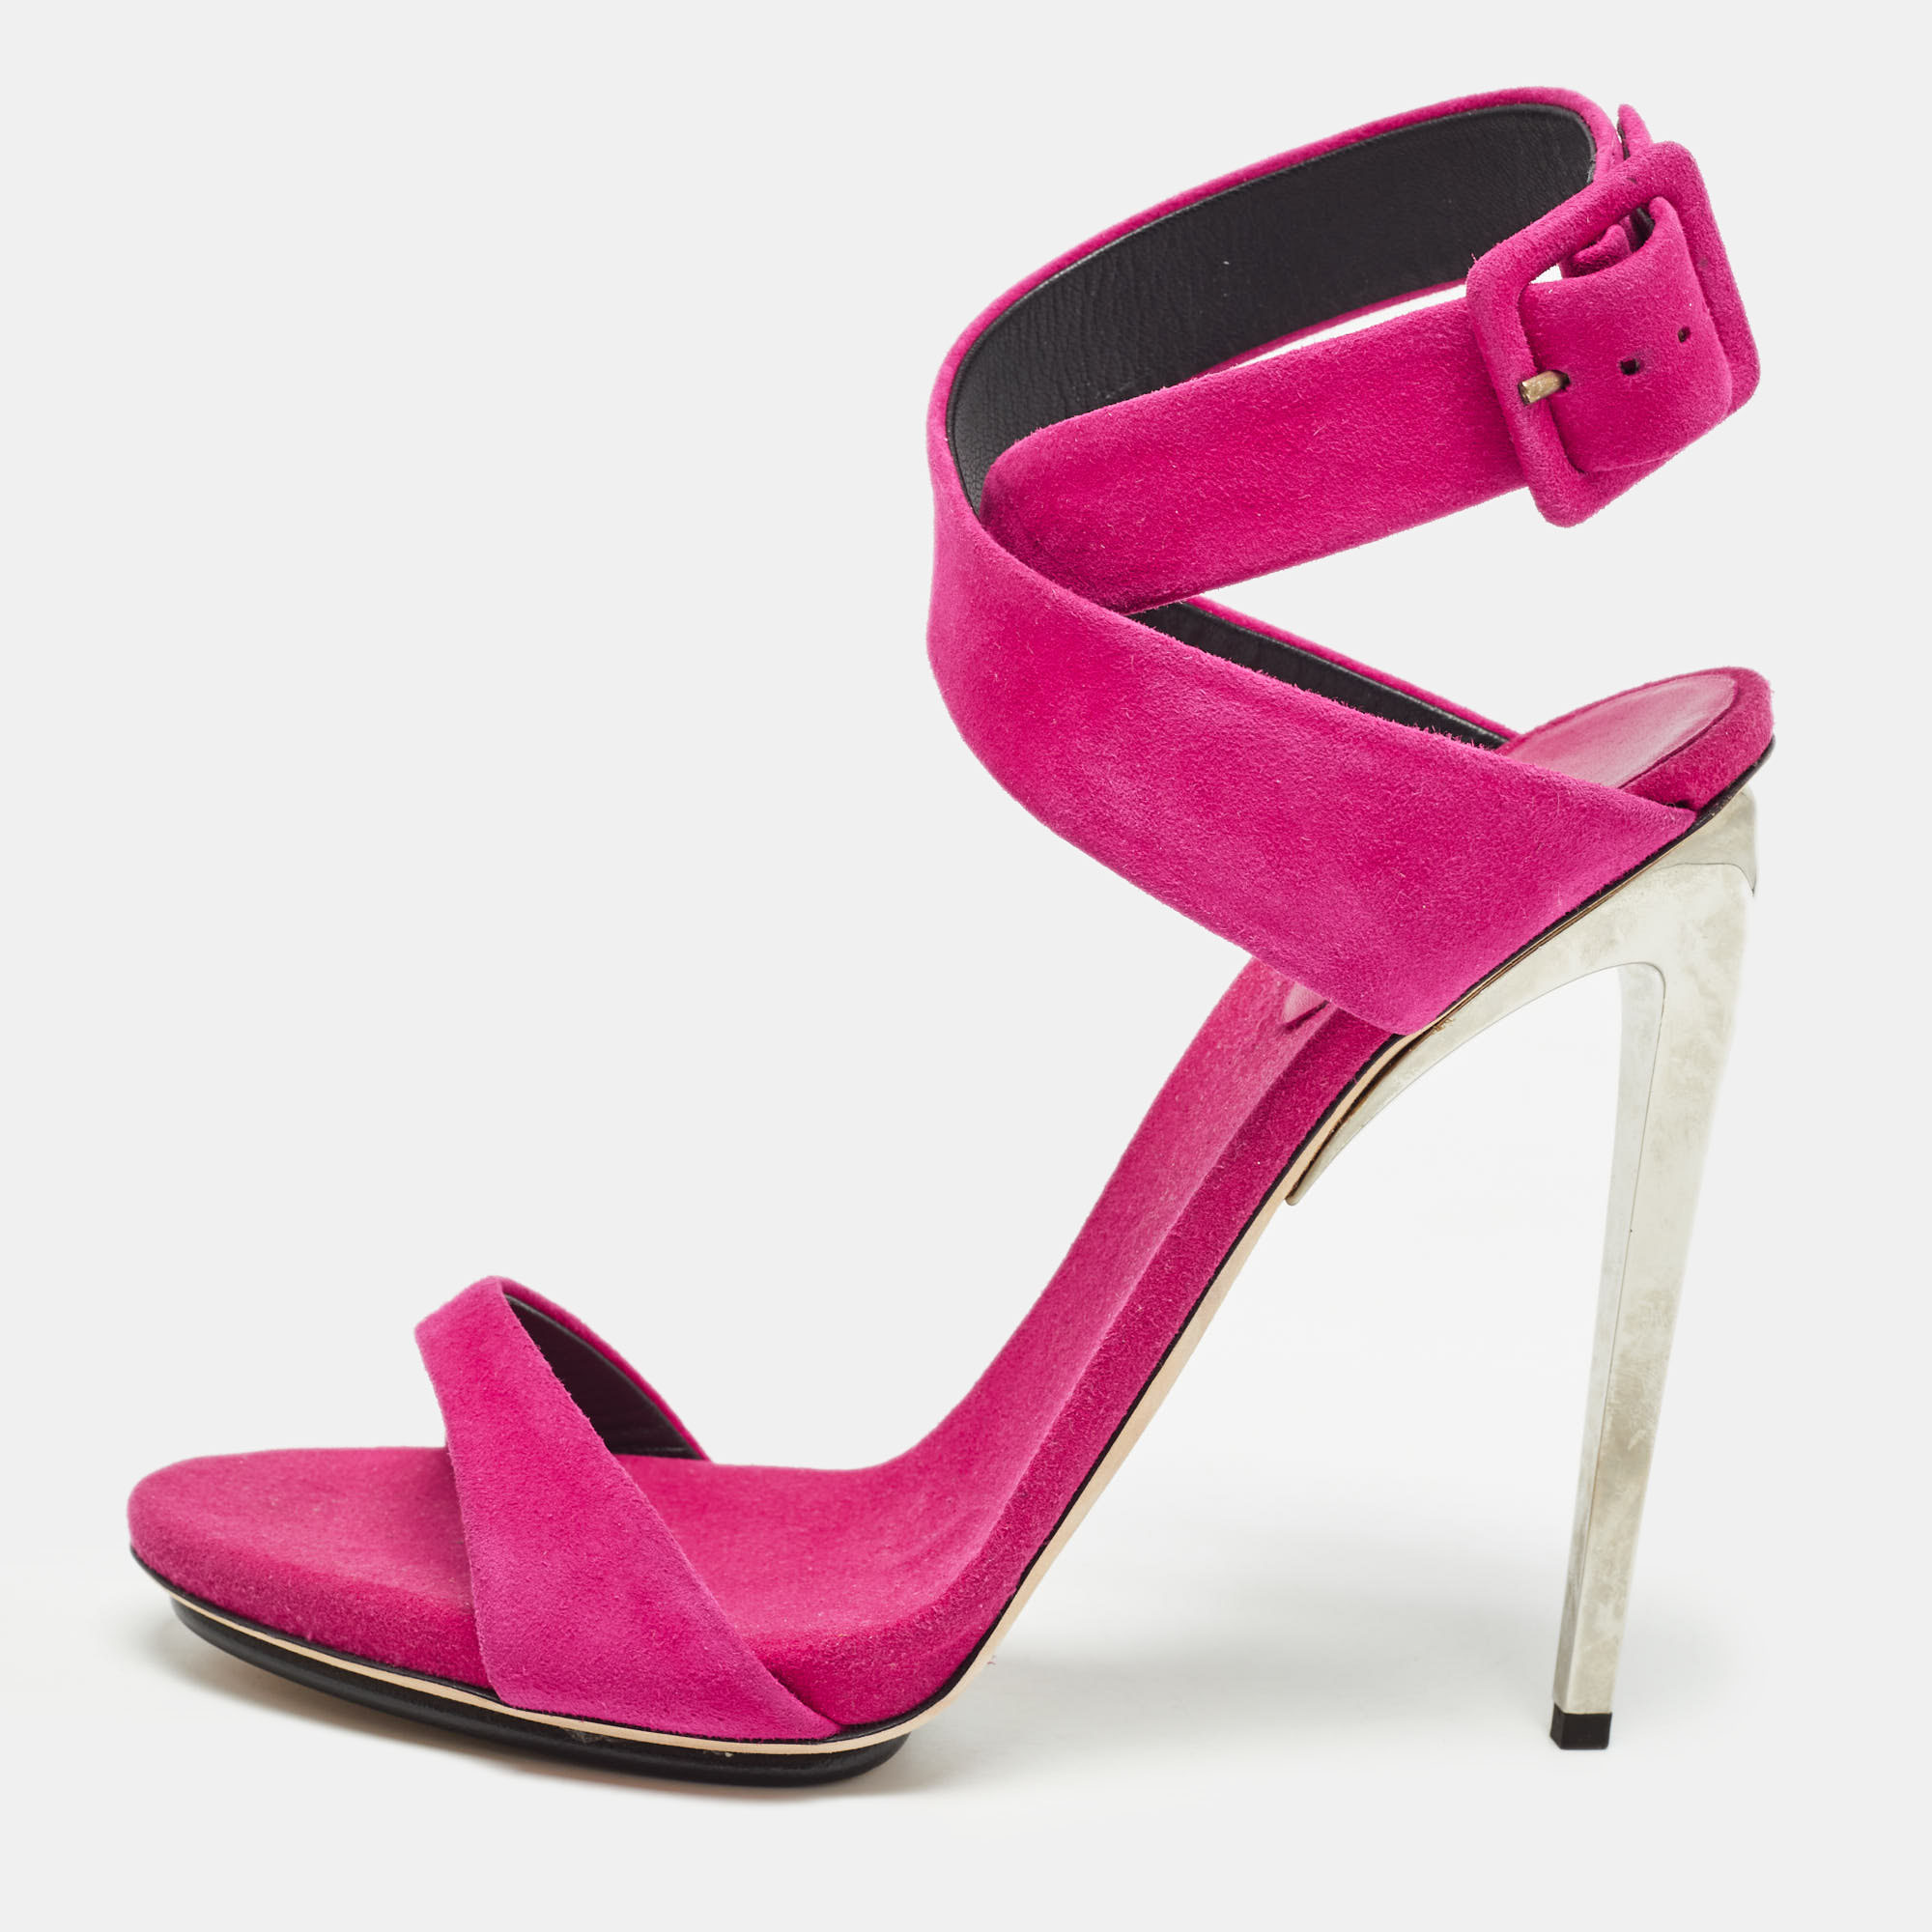 Giuseppe zanotti pink suede ankle strap sandals size 40